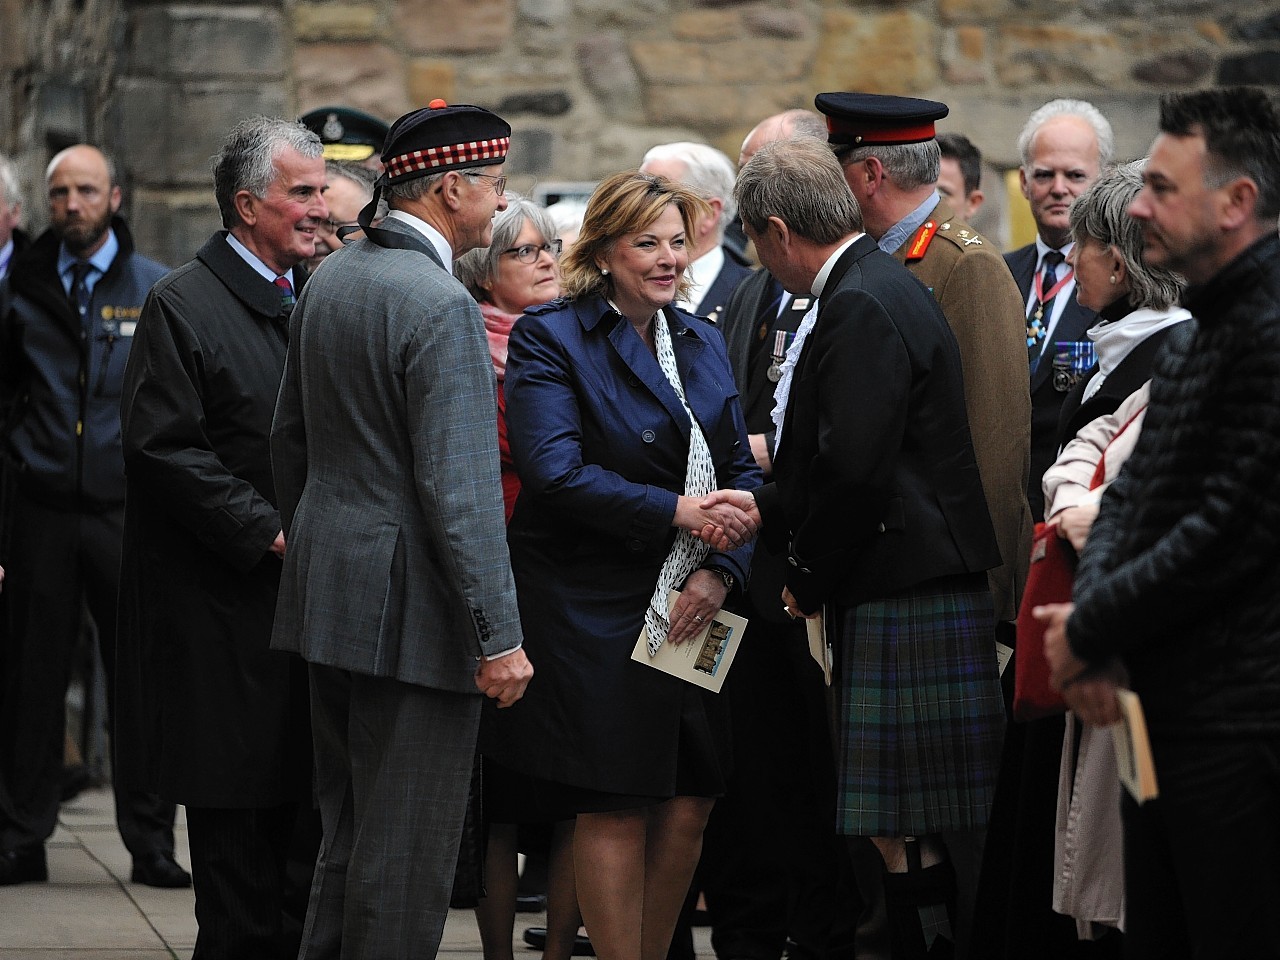 Organisers and descendants came together on thursday evening on an overnight vigil that will take place at the scottish national war memorial